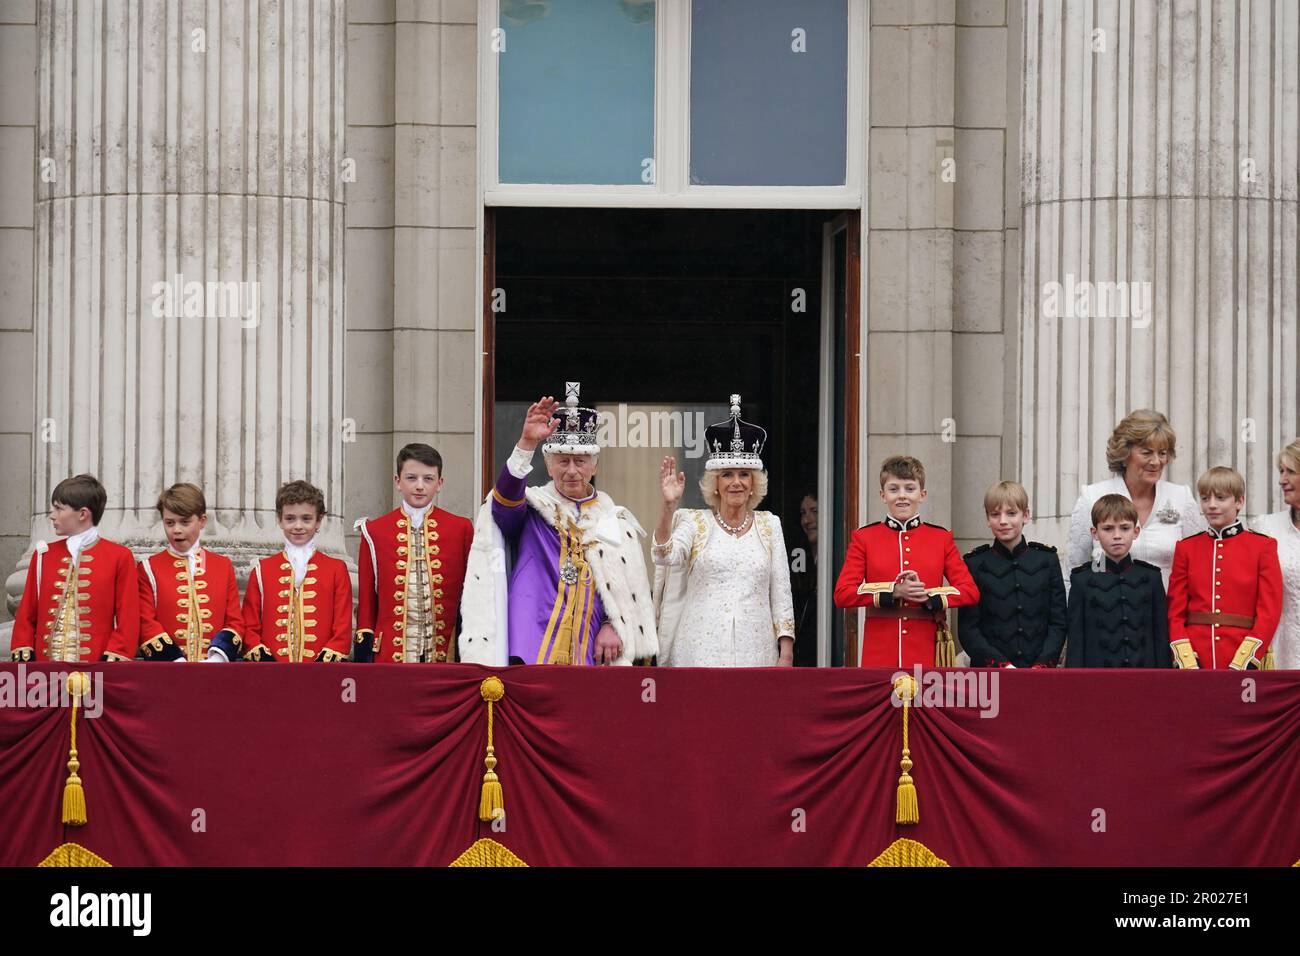 King Charles Iii And Queen Camilla On The Balcony Of Buckingham Palace